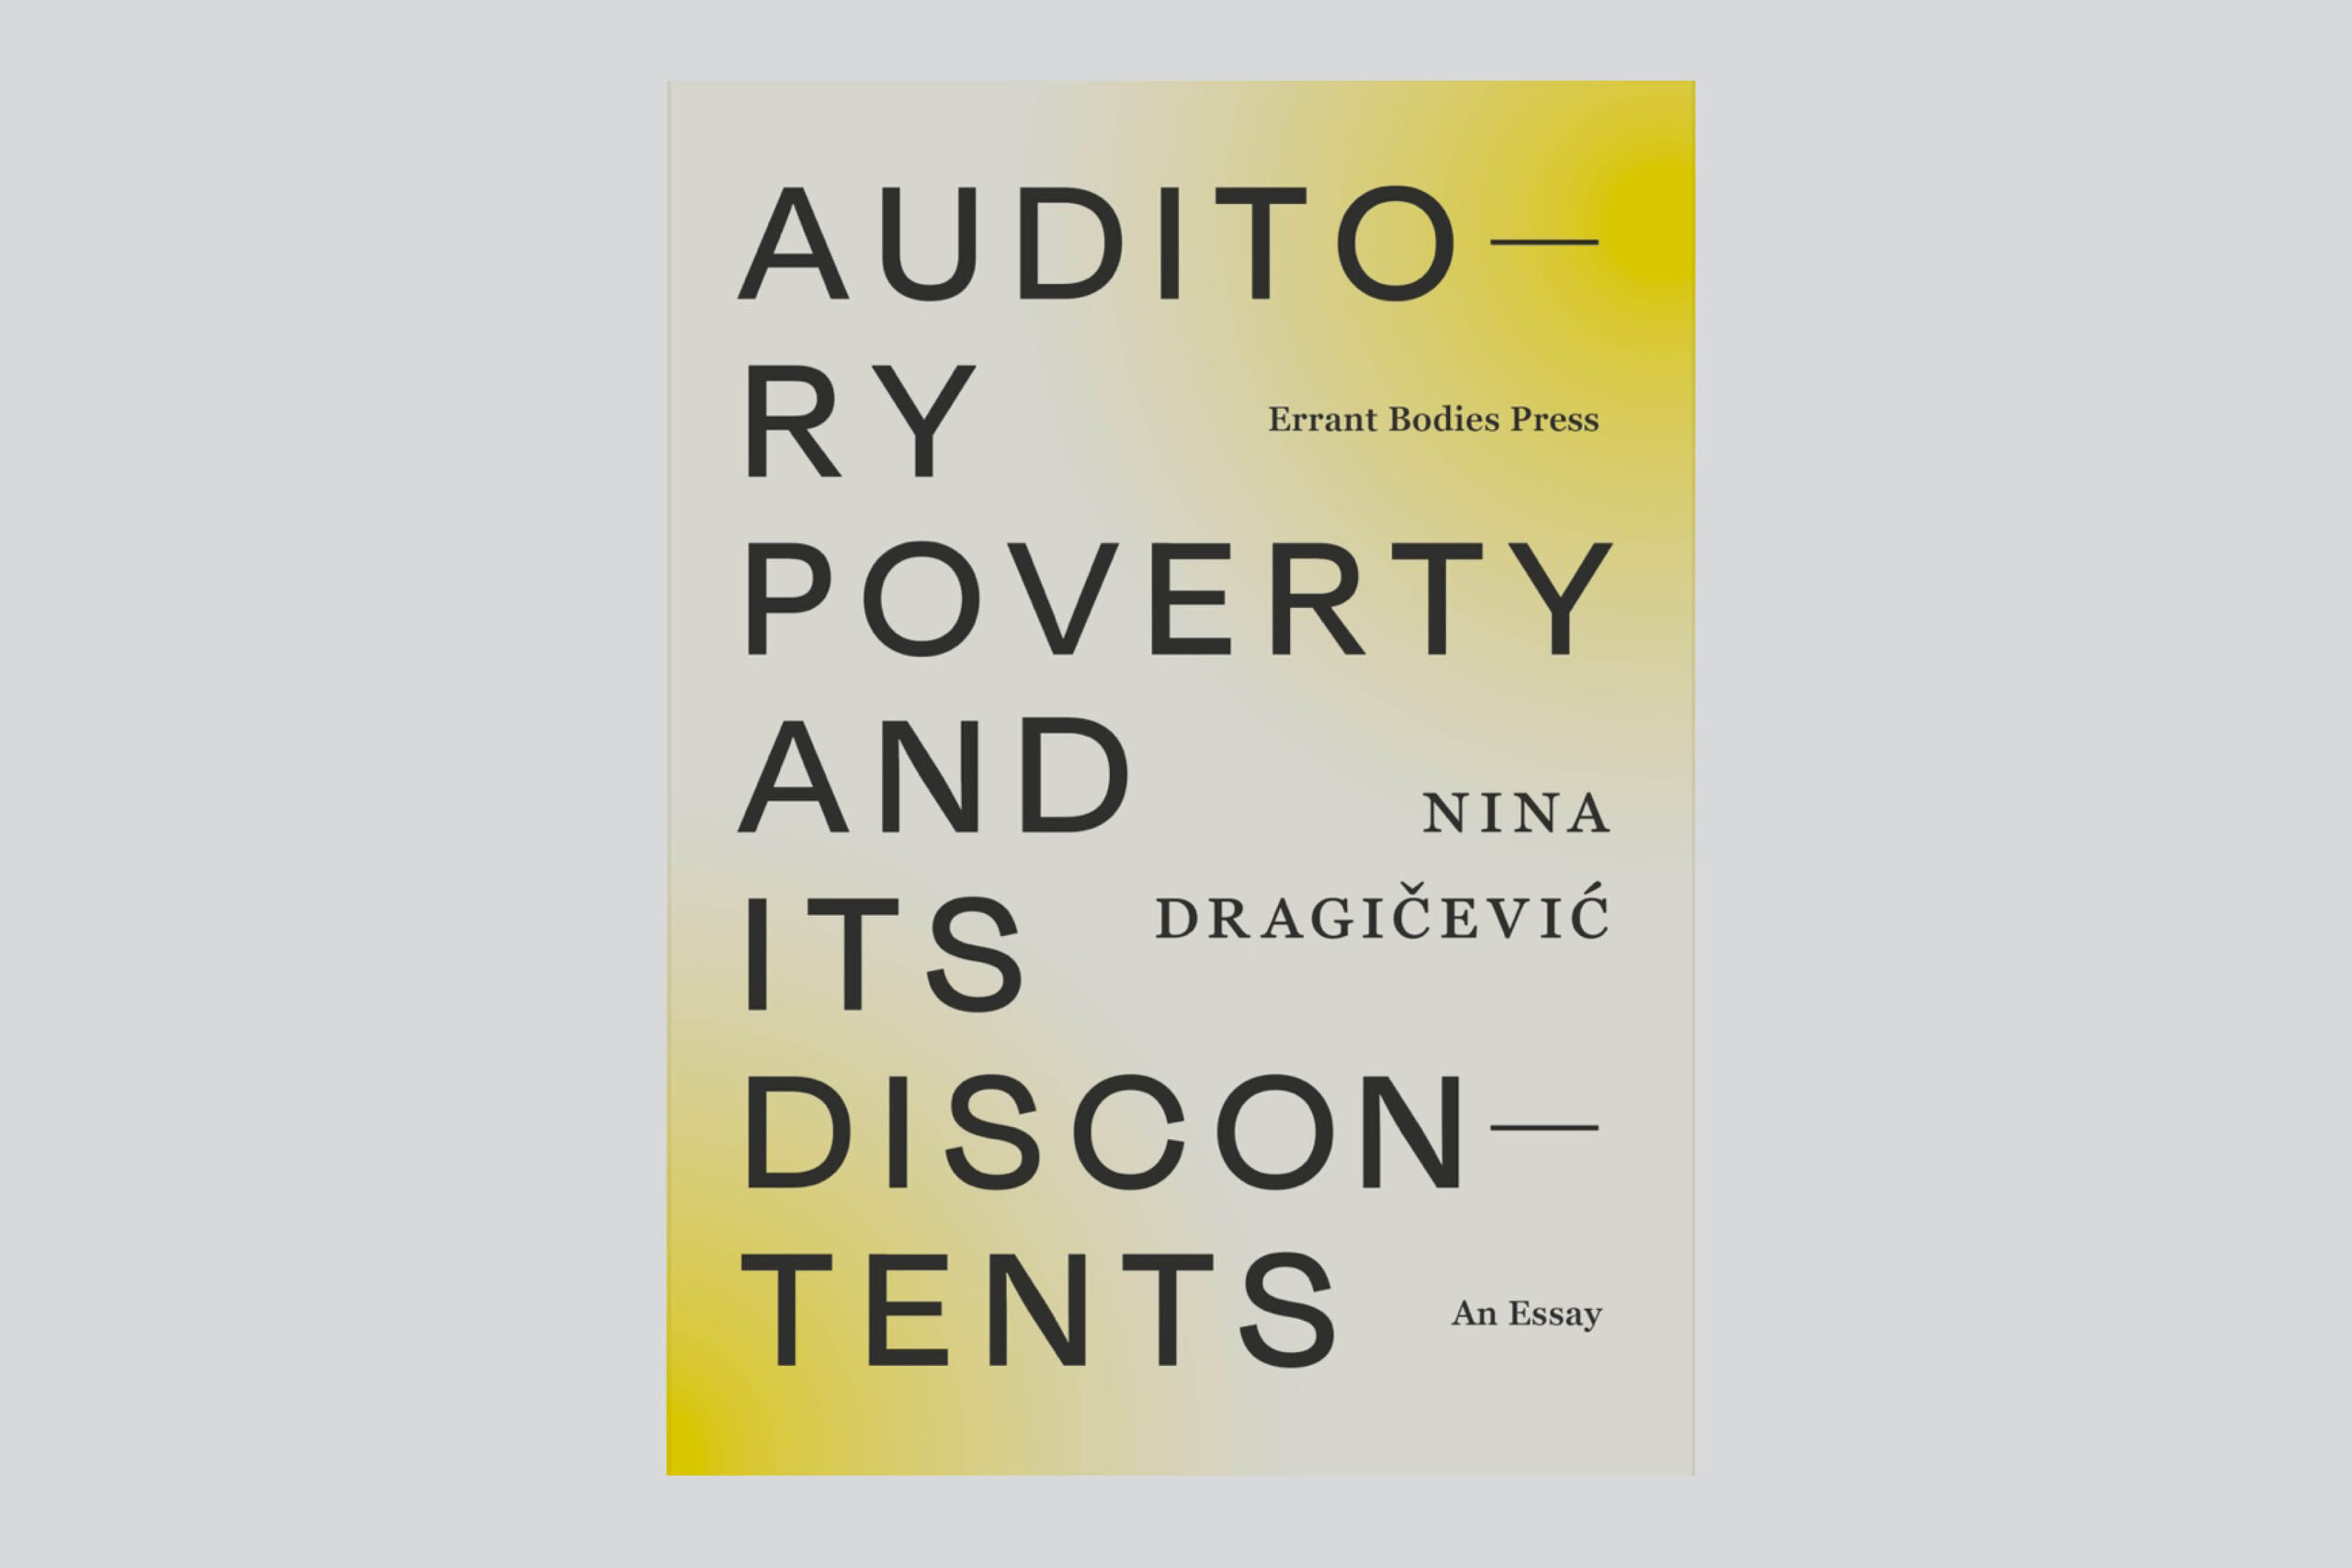 Auditory Poverty and its Discontents